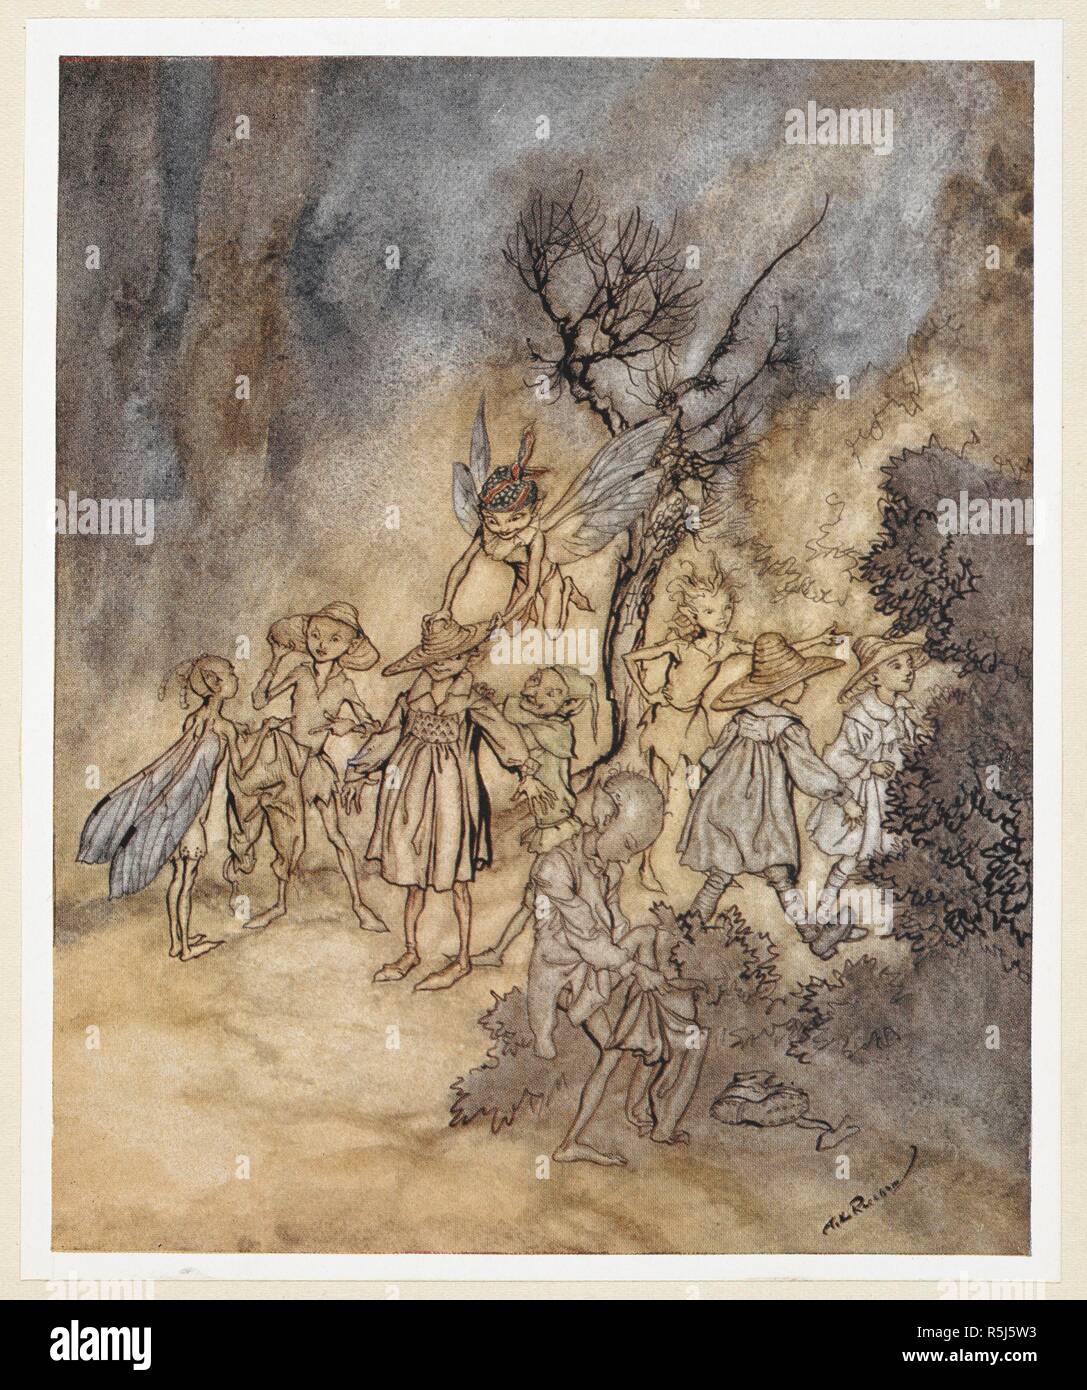 ACT IV: Scene I, line 138 Enter certain Reapers, properly habited. Juno and Ceres send Iris to fetch some nymphs and reapers to perform a country dance. . The Tempest ... Illustrated by Arthur Rackham. London : William Heinemann ; New York : Doubleday, Page & Co., 1926. Source: 11766.dd.3 plate 17. Stock Photo